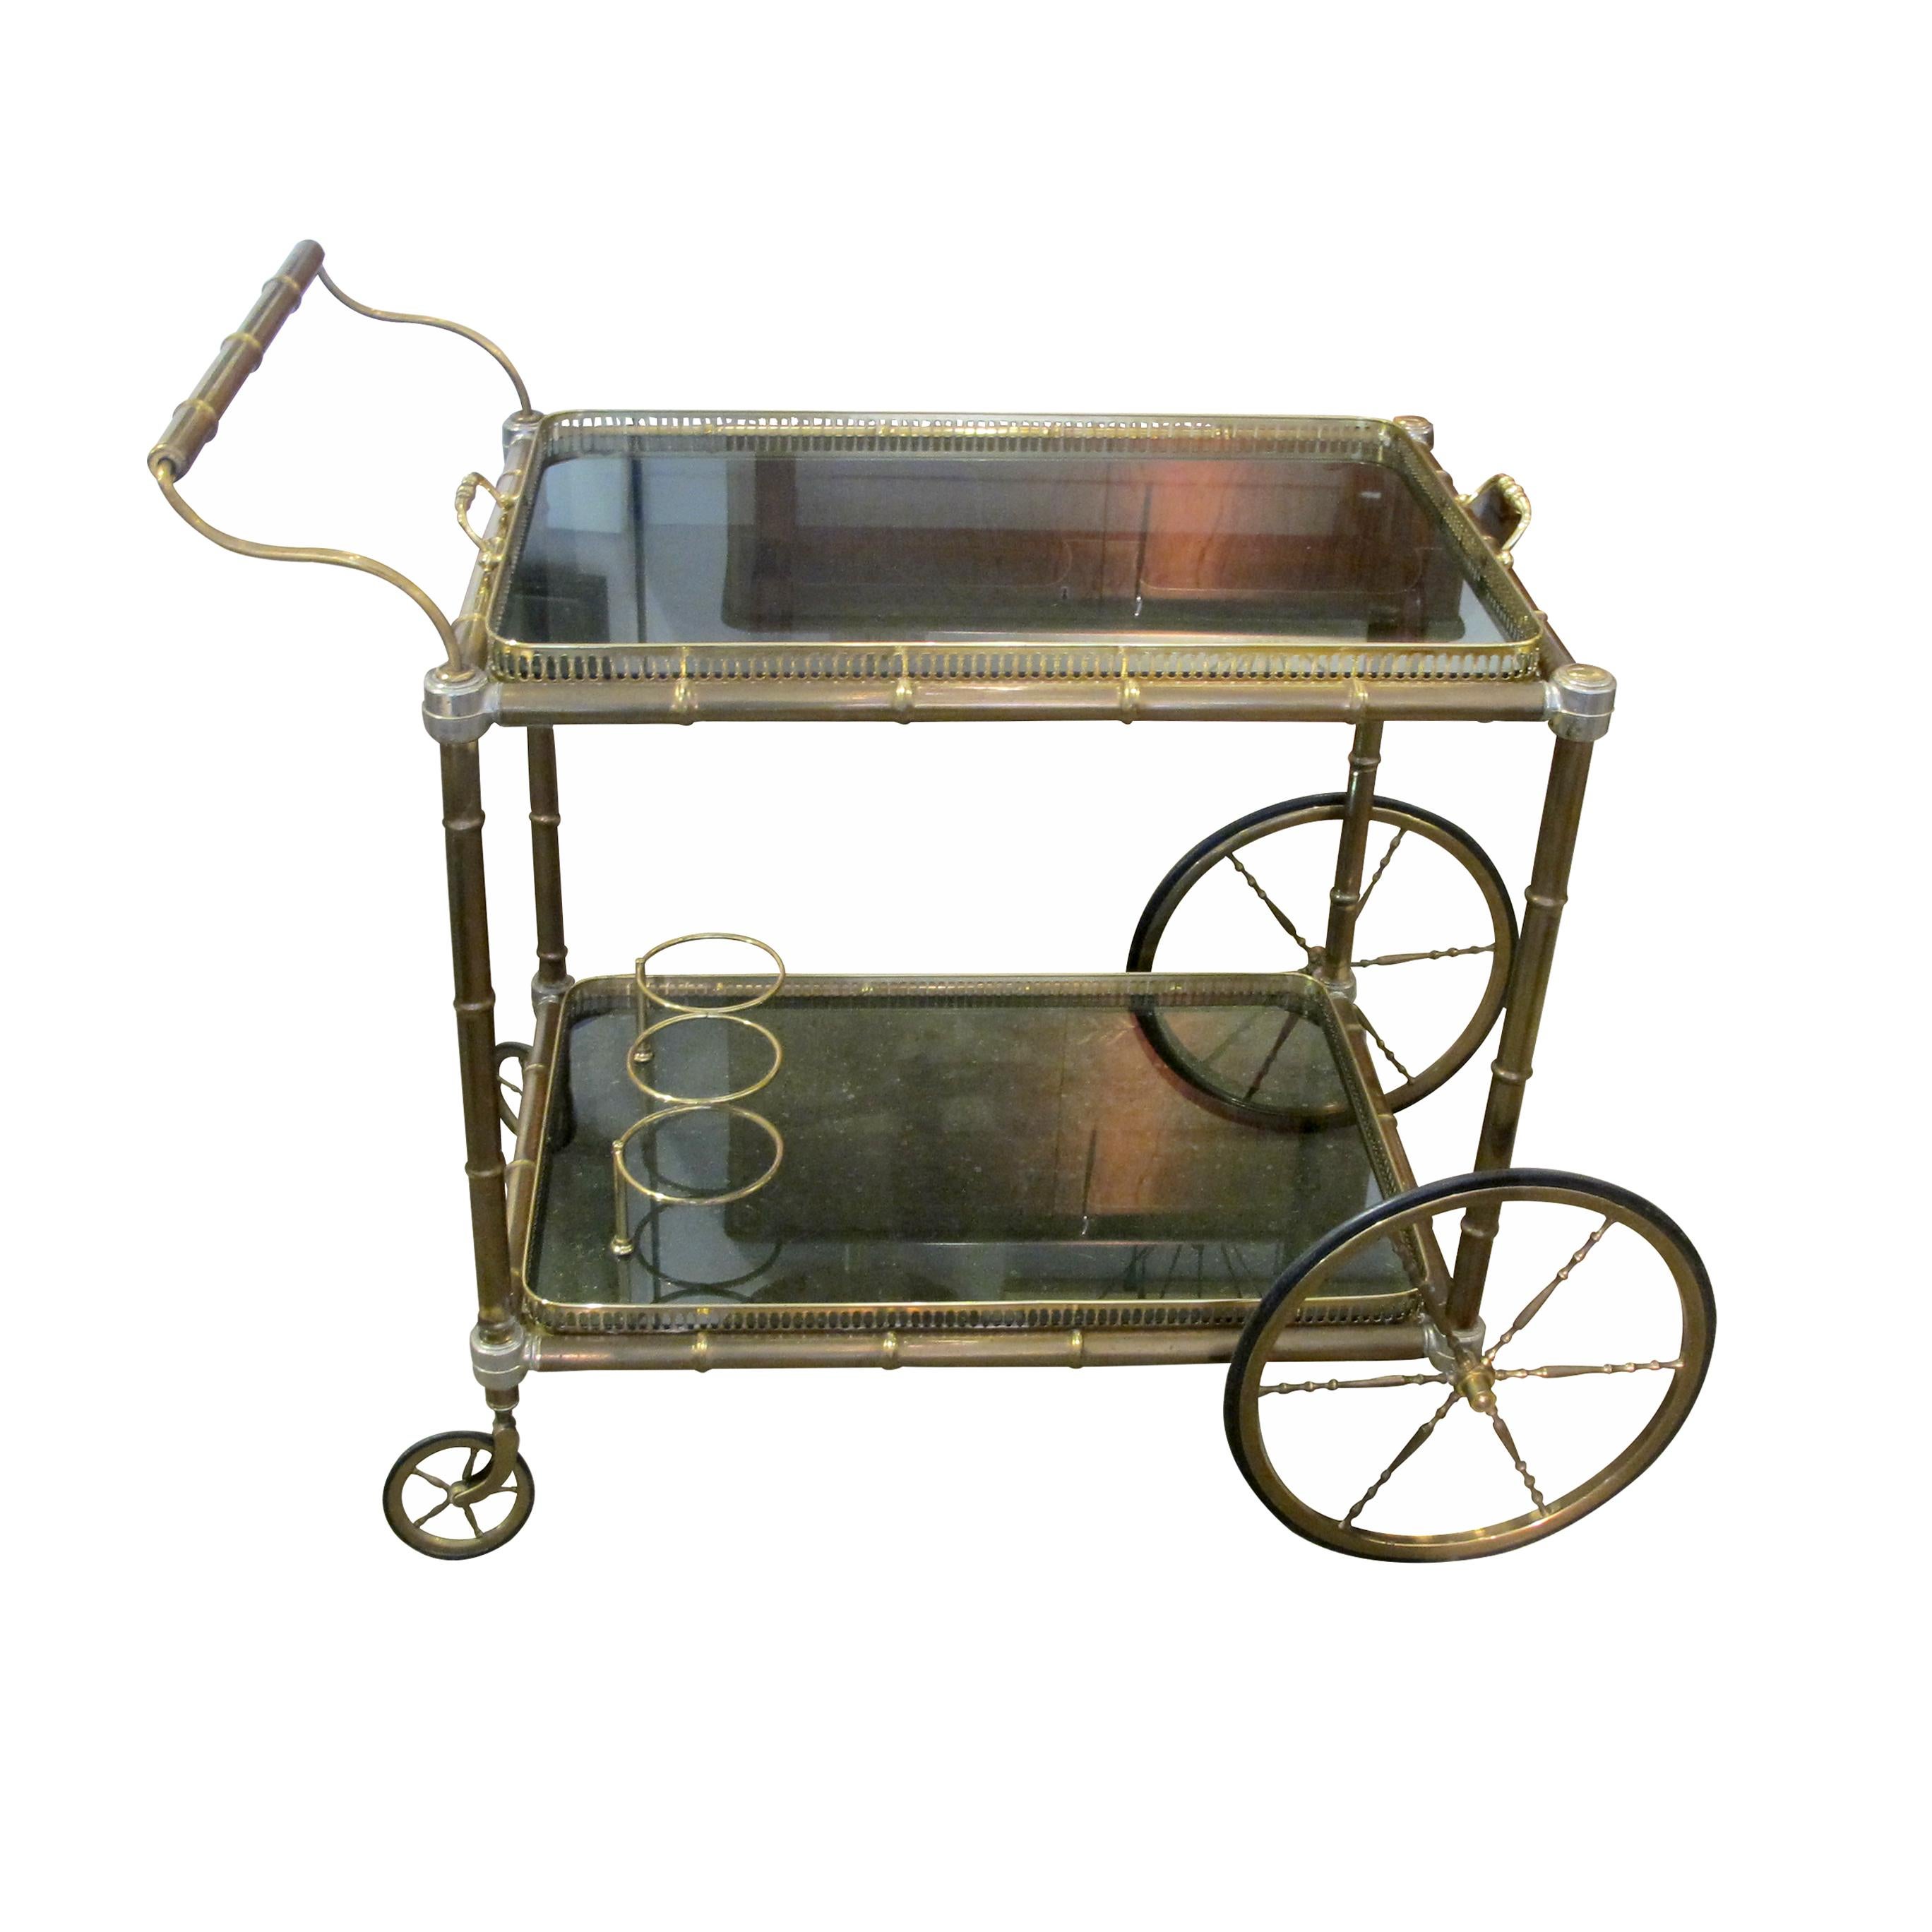 A 1960s well-made brass serving bar cart/trolley with an interesting bamboo effect on the wheels. The trolley is in great condition with fully functioning wheels which all work well. The two smaller swivelling wheels at the back allow it to be